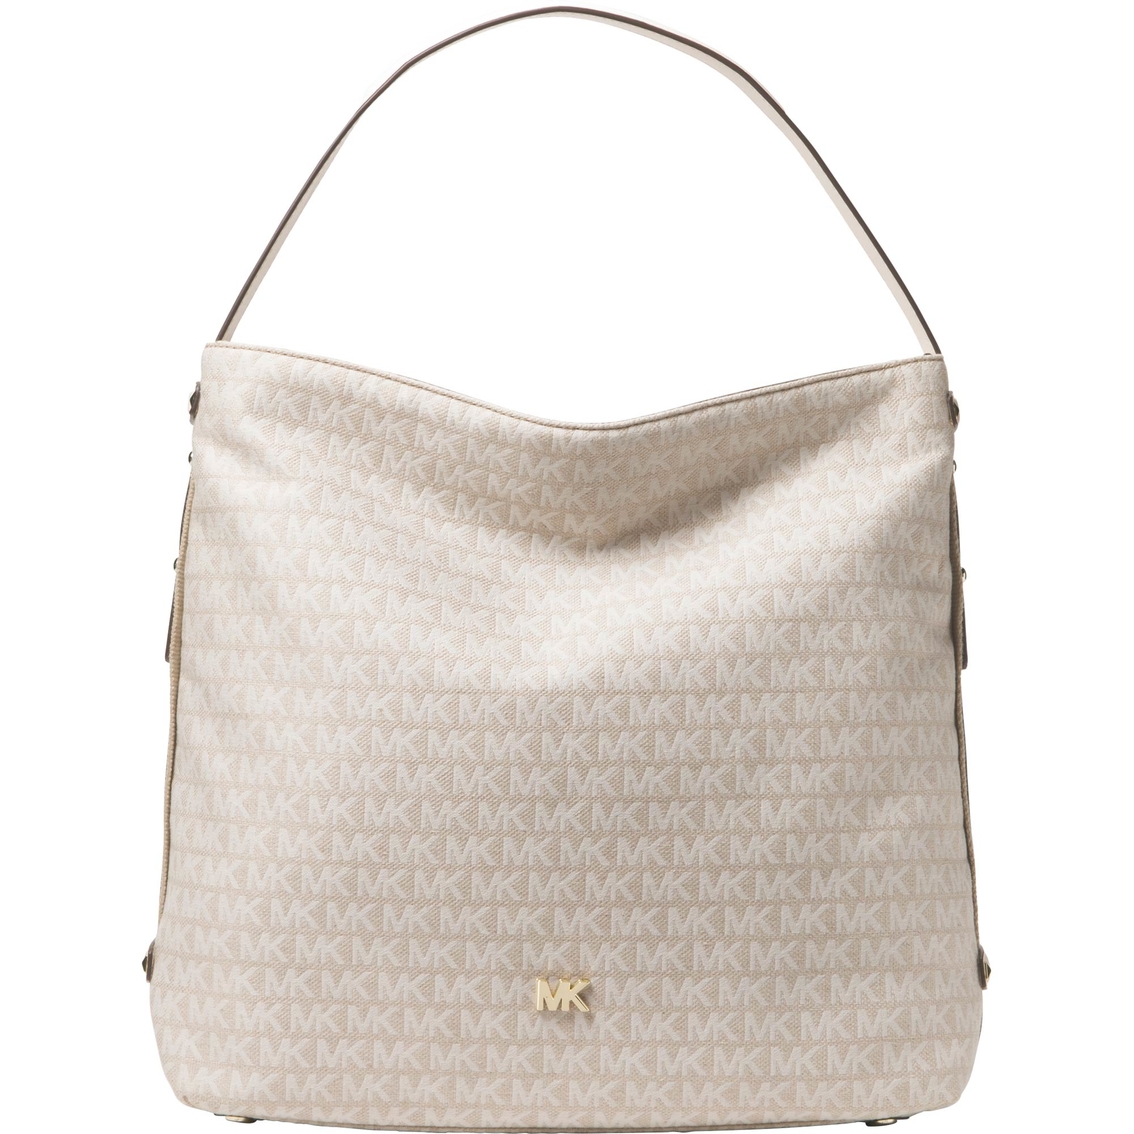 michael kors griffin large tote